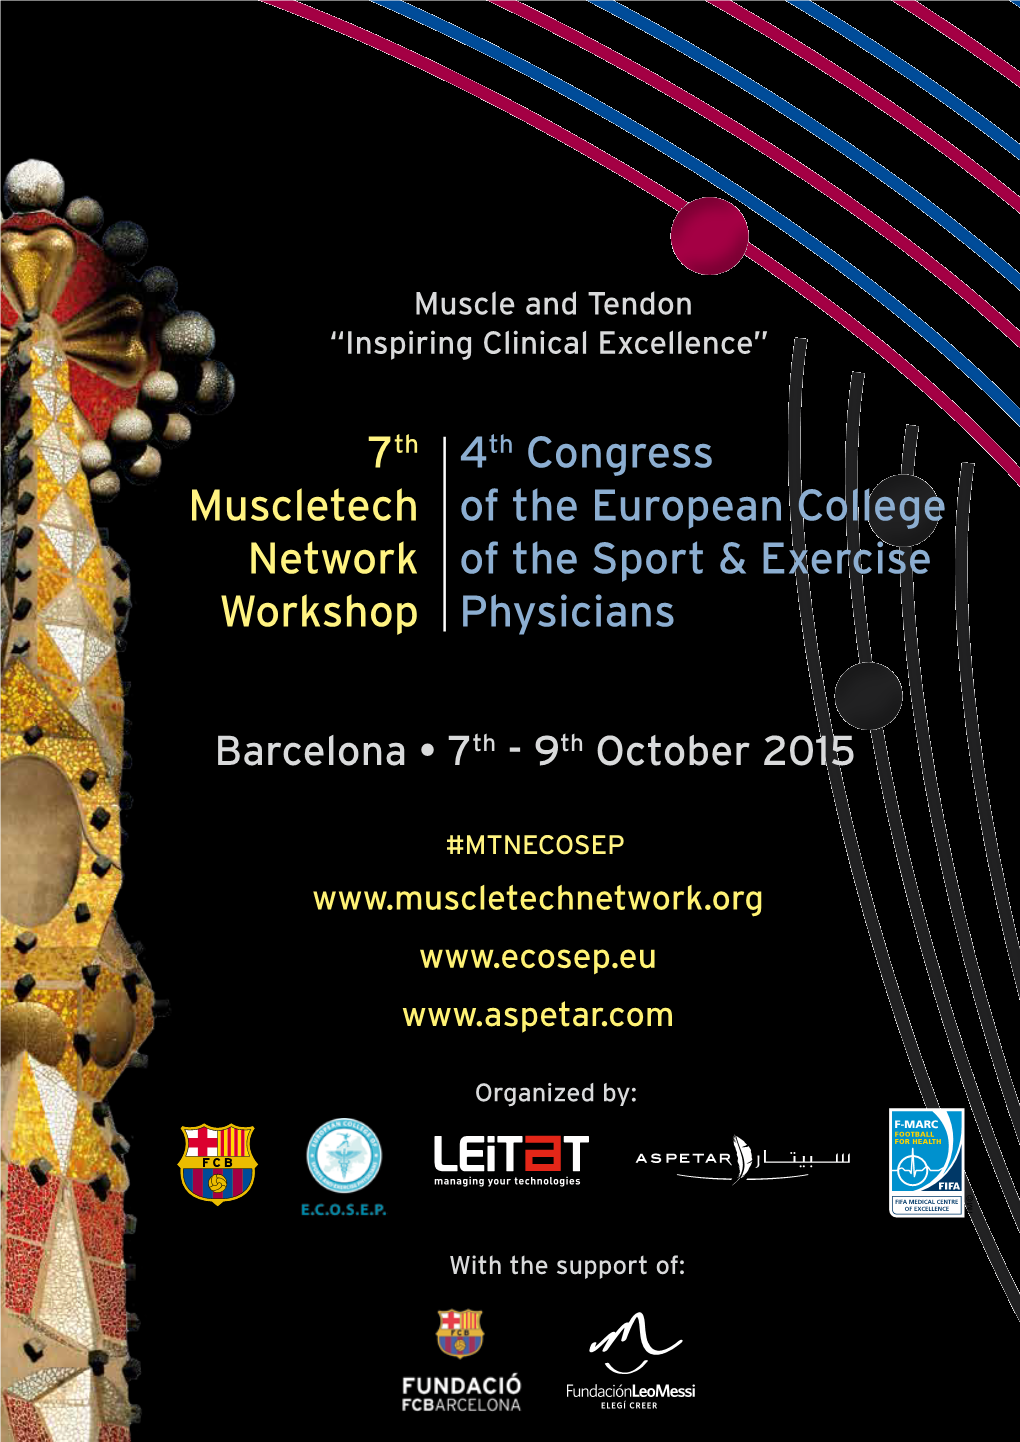 Muscletech Network Workshop 4Th Congress of the European College of the Sport & Exercise Physicians Barcelona • 7Th - 9Th October 2015